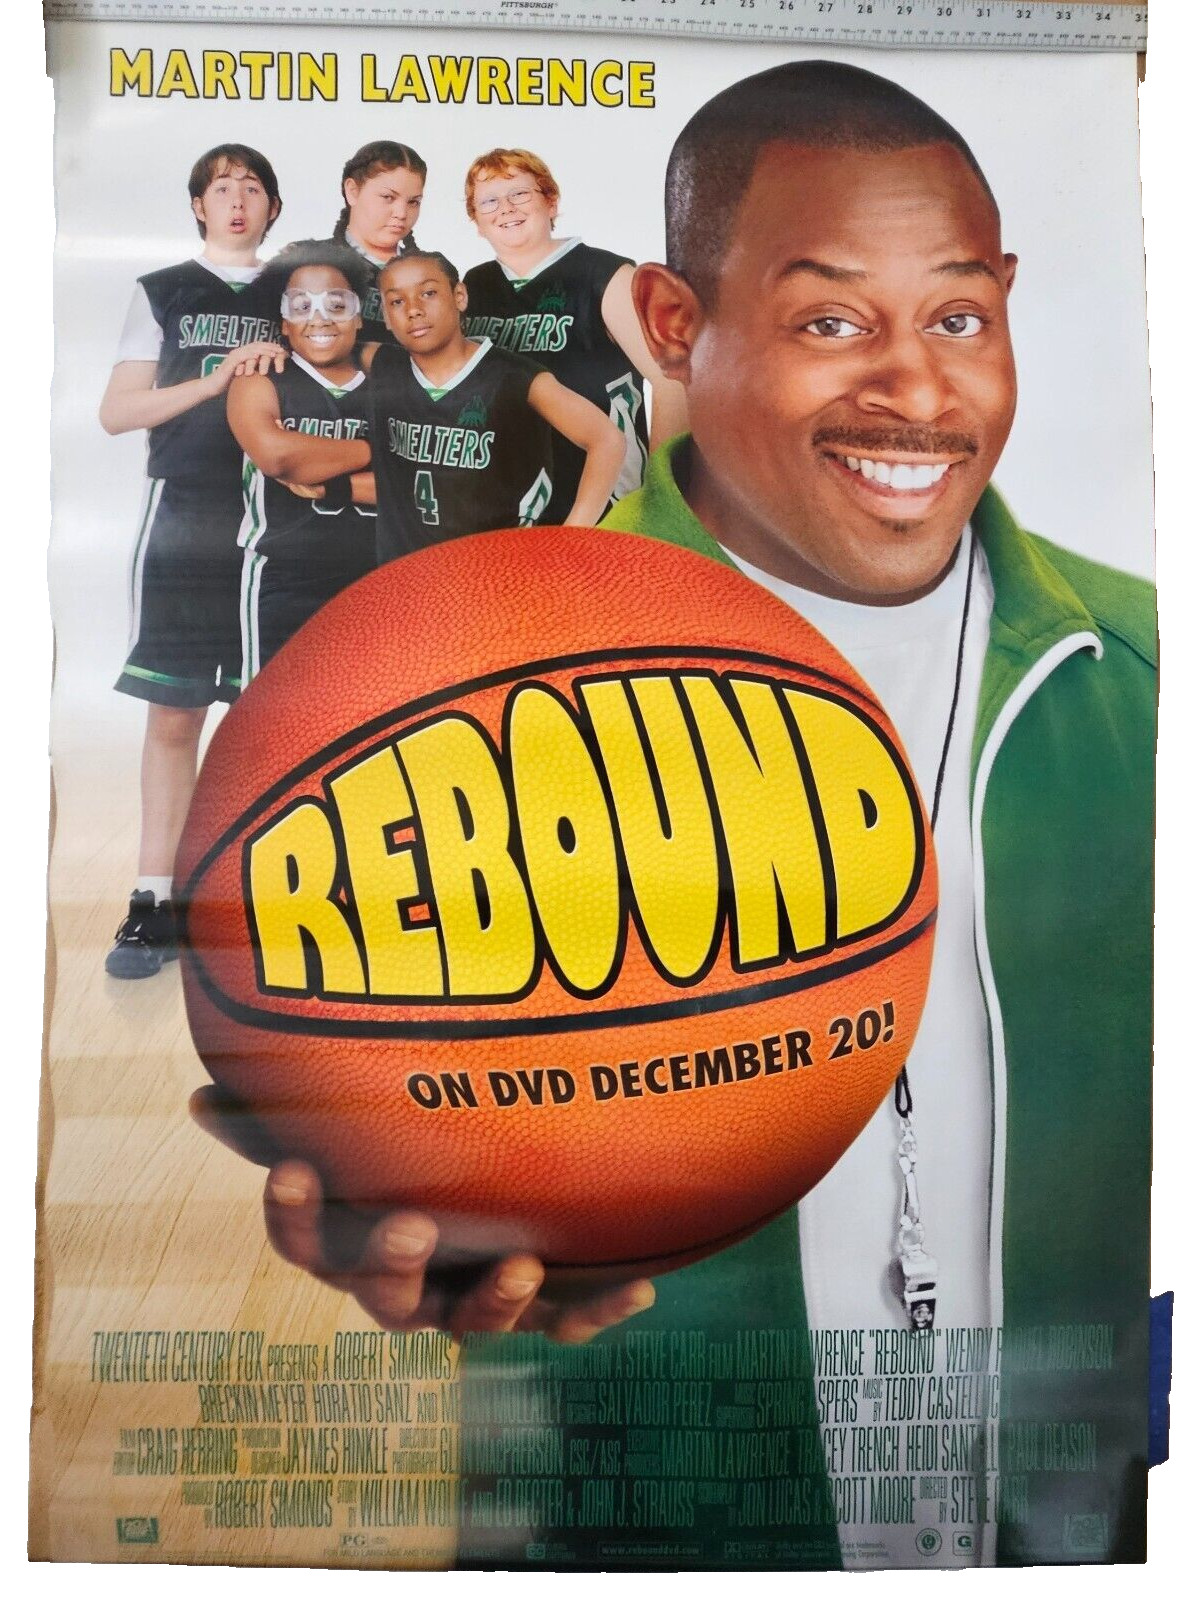 A family Comedy Staring Martin  Lawrence  REBOUND   27 x 40 DVD Movie poster